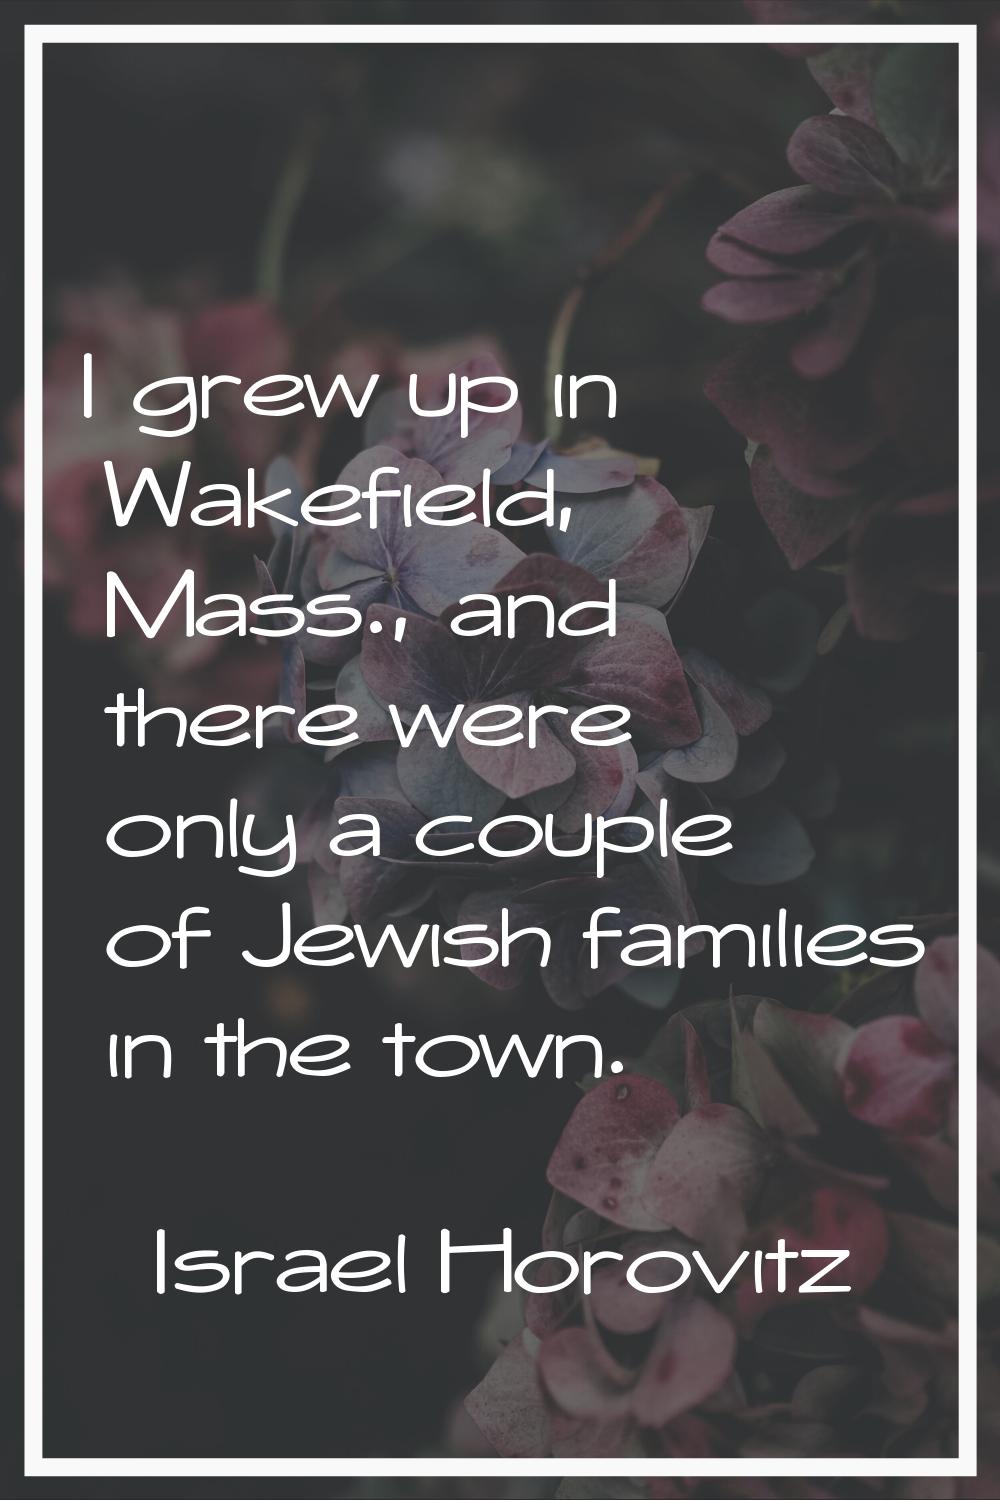 I grew up in Wakefield, Mass., and there were only a couple of Jewish families in the town.